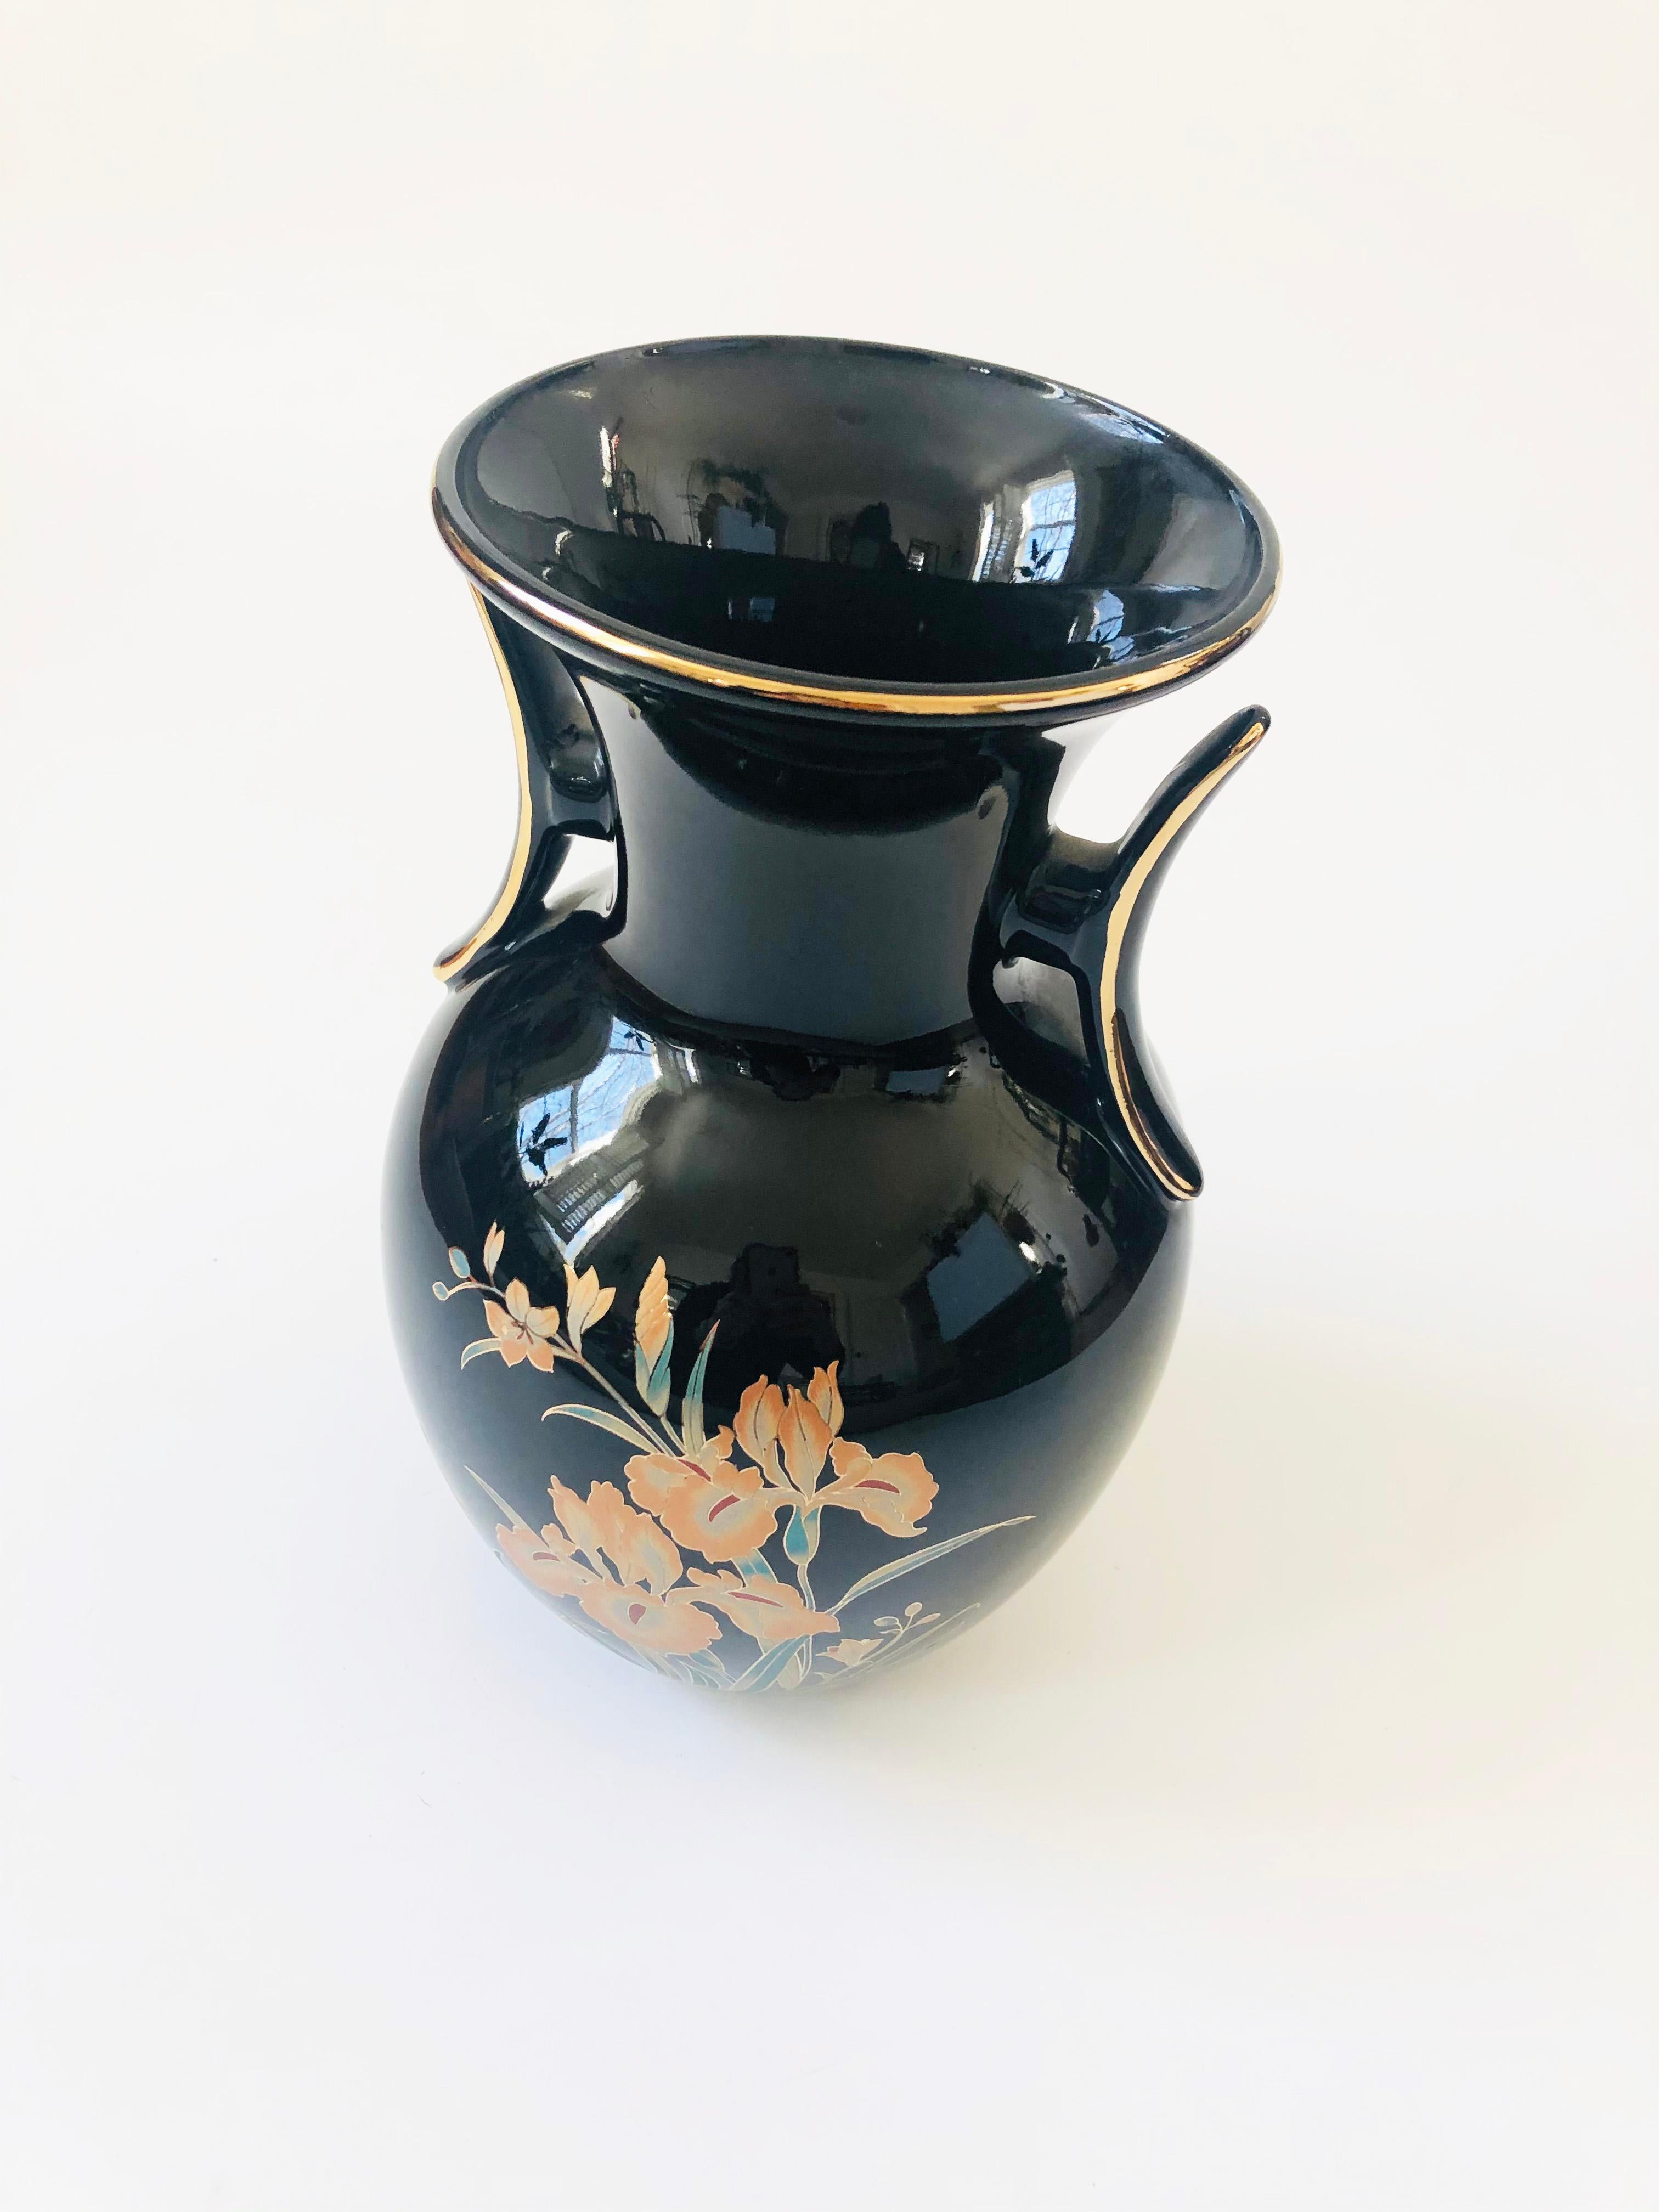 A lovely vintage ceramic vase. Glossy black finish with a highly detailed iris design in gold, pale orange and green applied to the surface. Made in Japan.